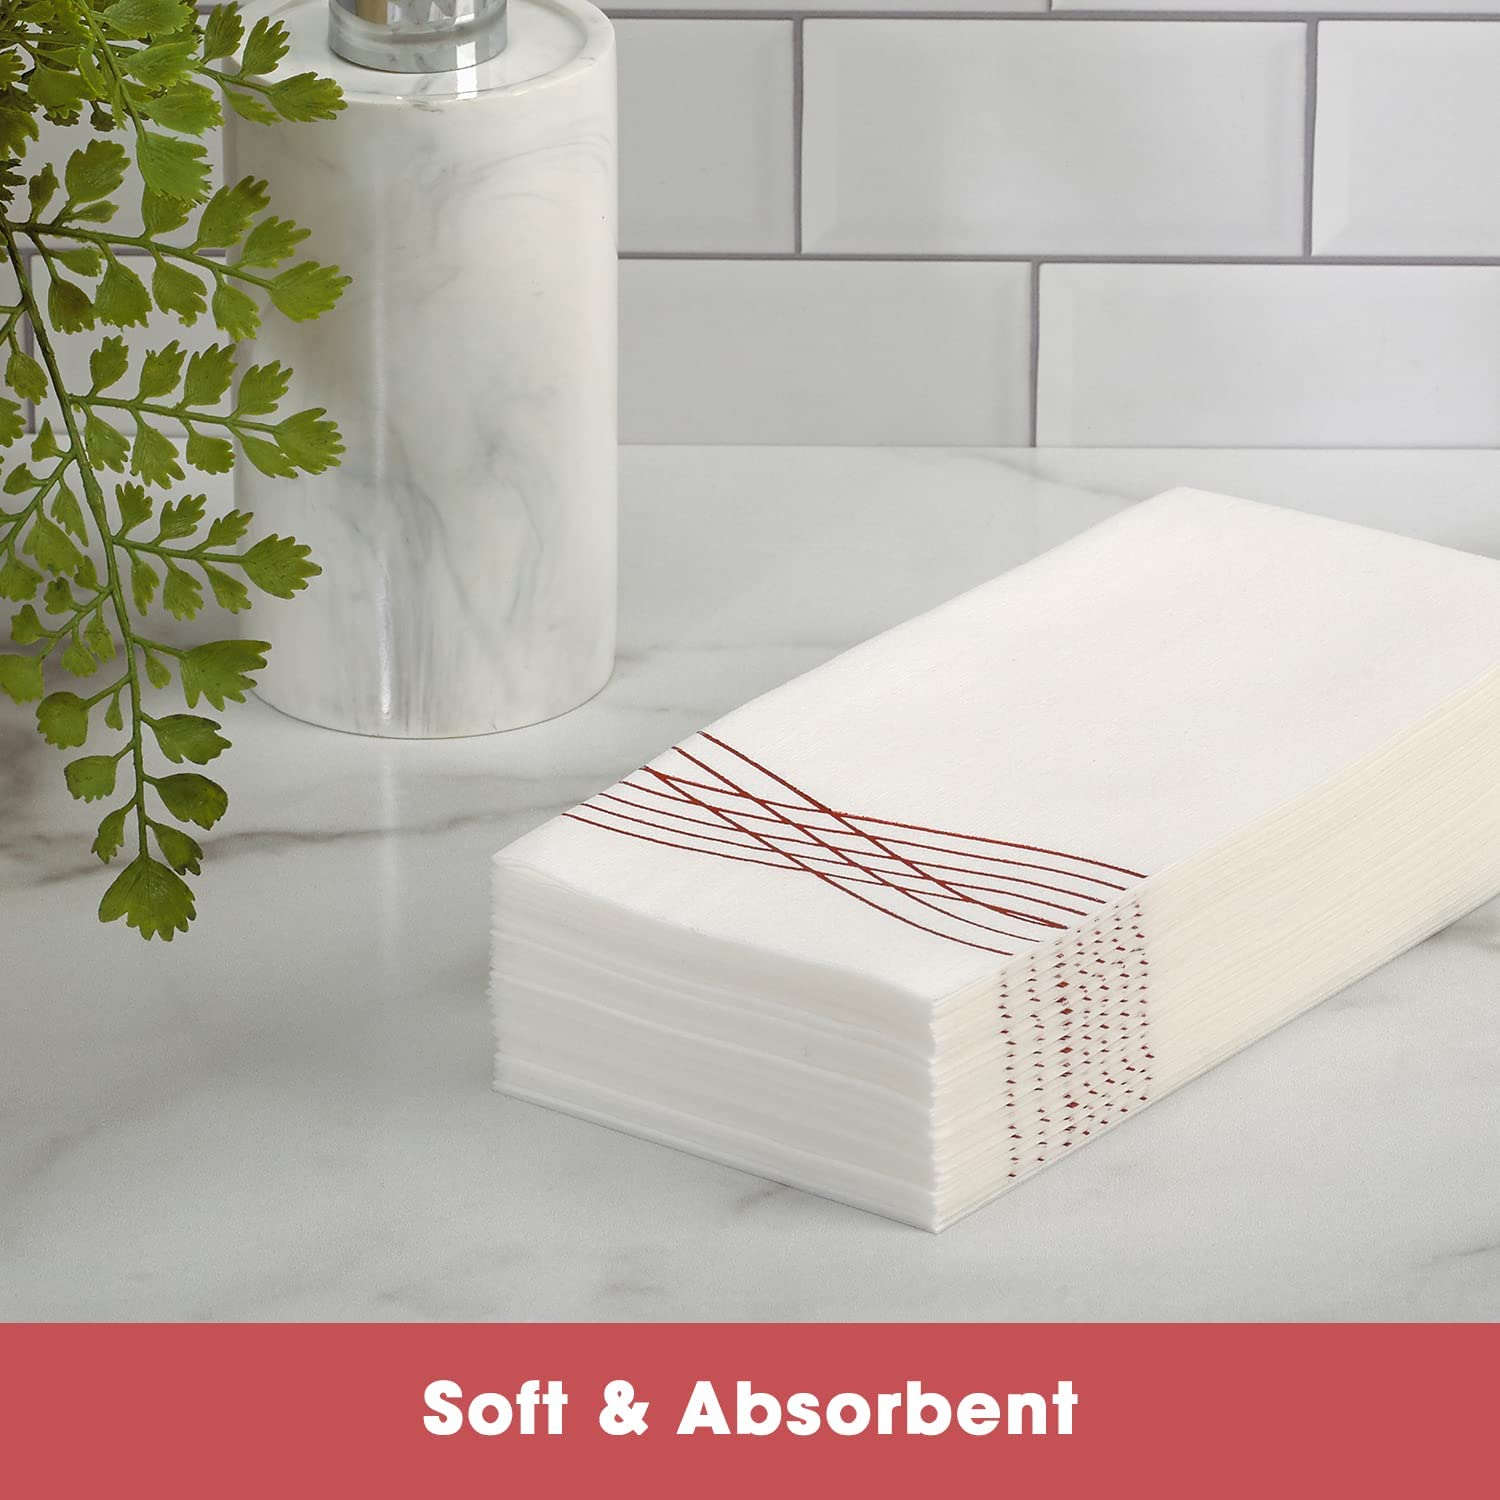 Disposable Guest Hand Towels Bathroom